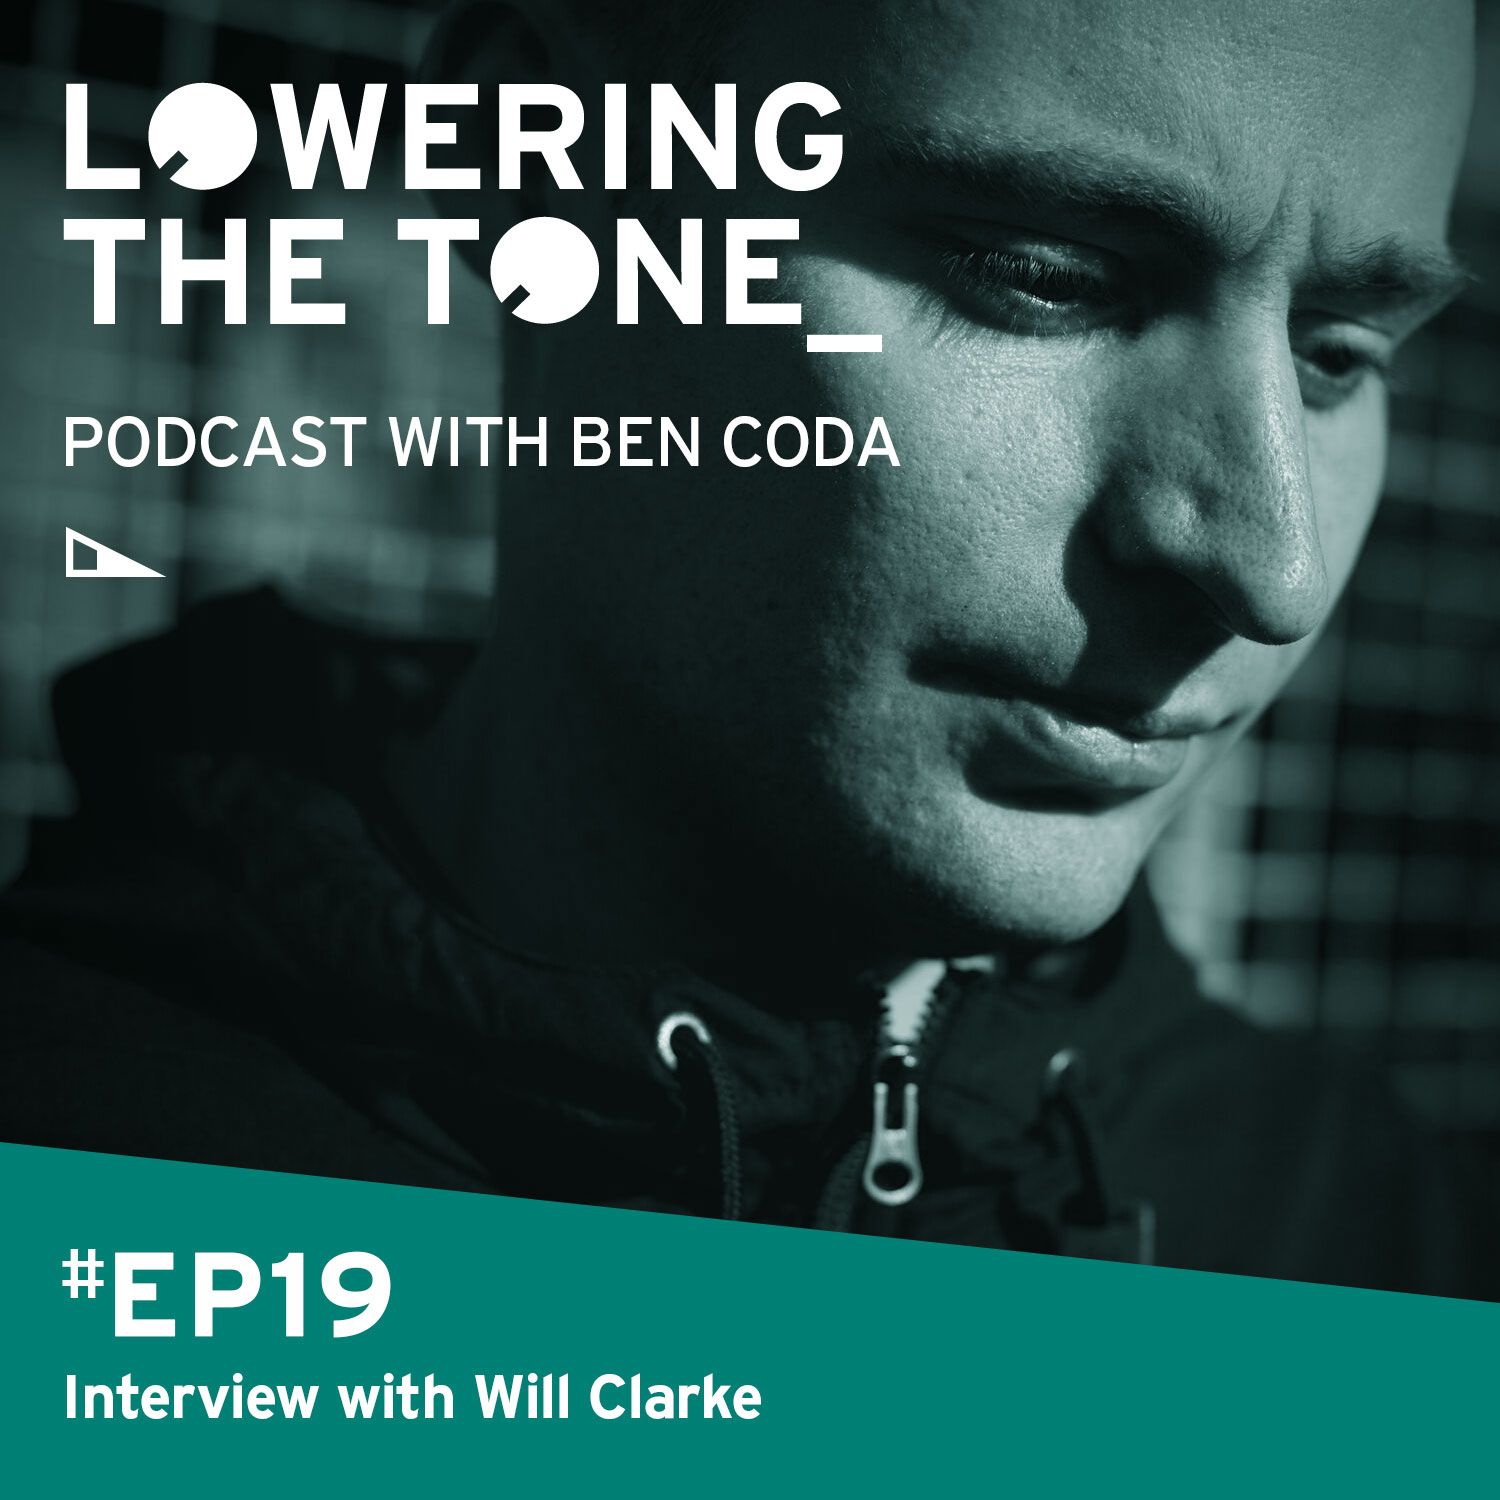 Ben Coda - 'Lowering The Tone' Episode 19 (With Will Clarke Interview)